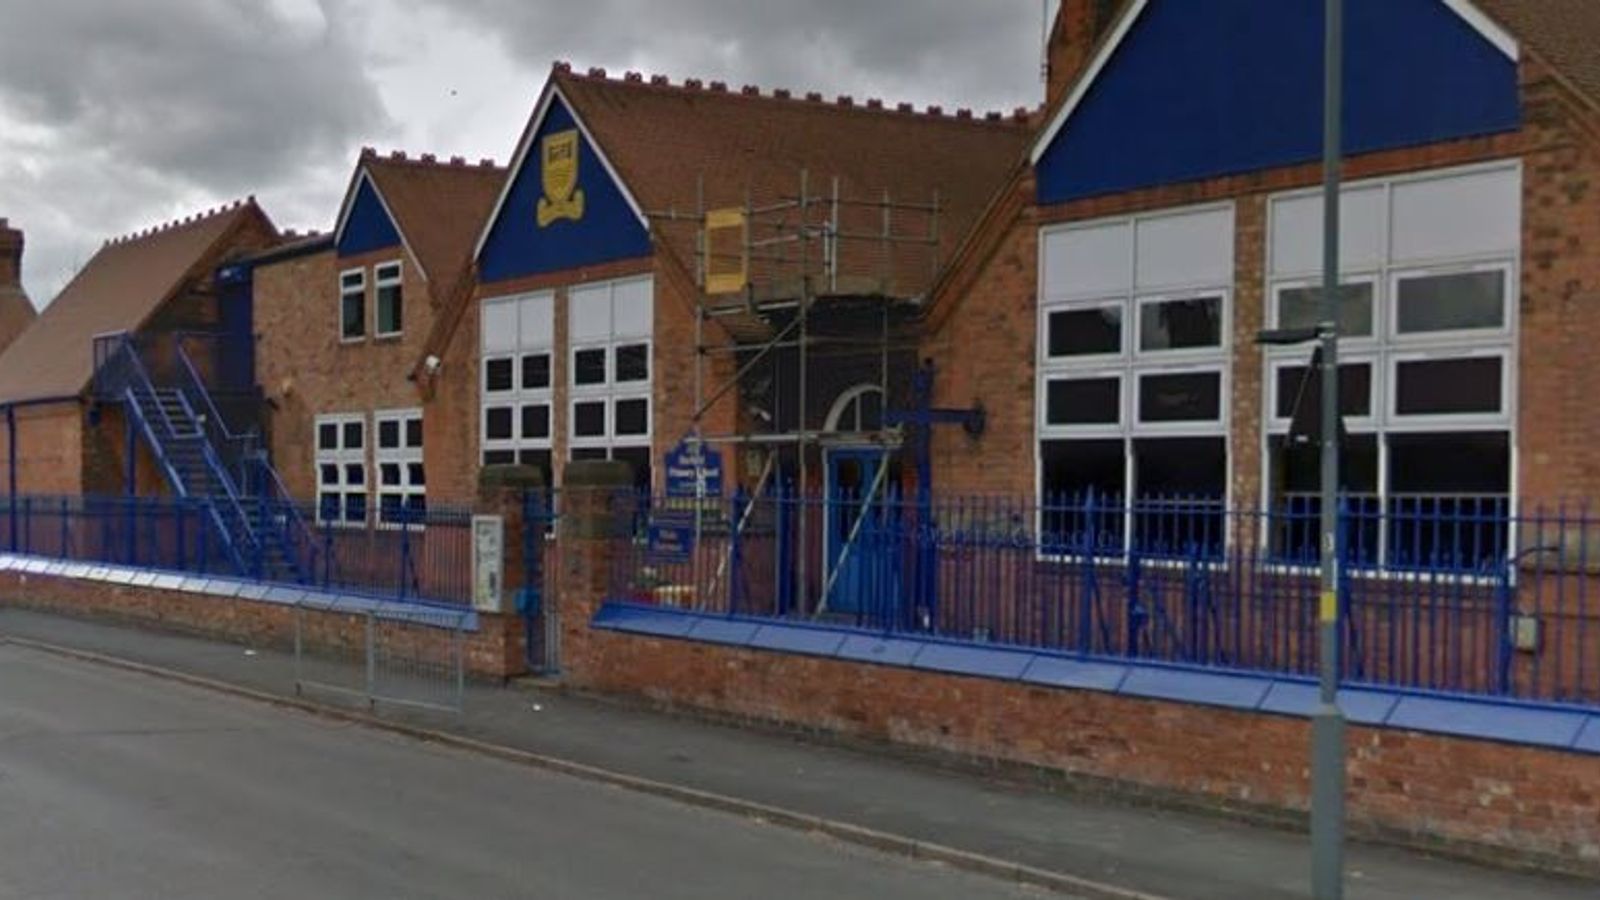 Birmingham: Six injured and primary school 'put on lockdown' after two dogs began 'attacking people'